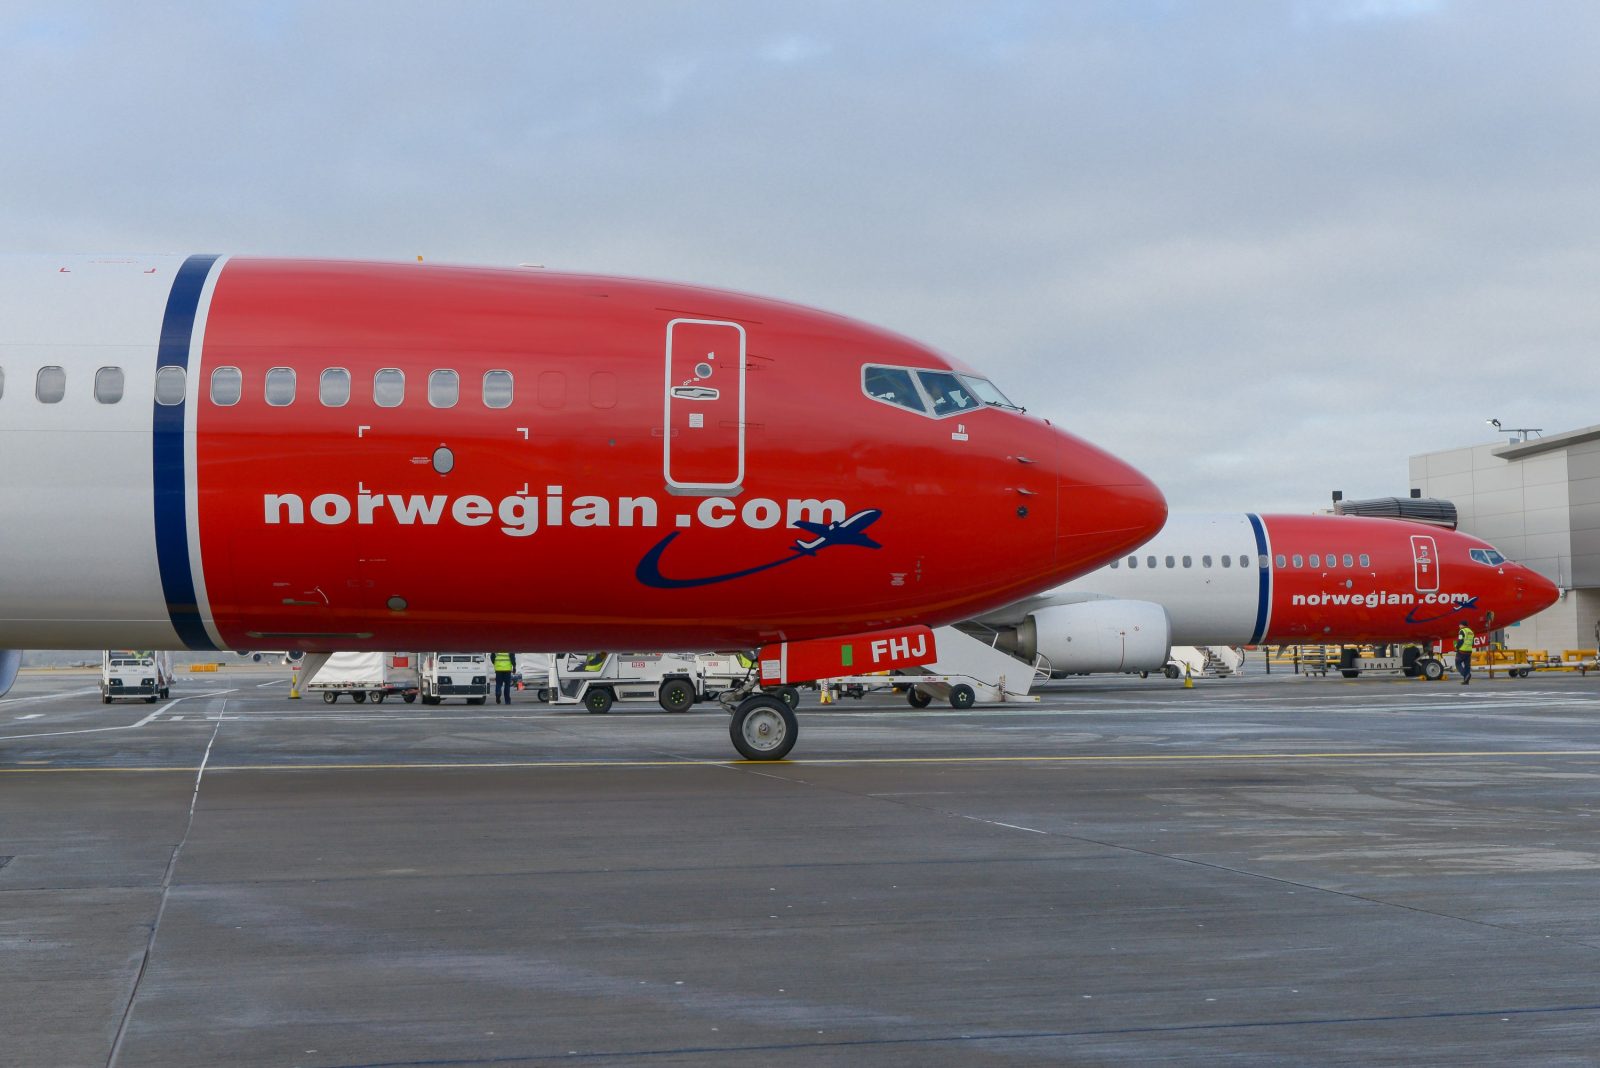 Low-Cost Carrier Primera Air Collapses, Norwegian Comes to the Rescue with "Repatriation Fares"